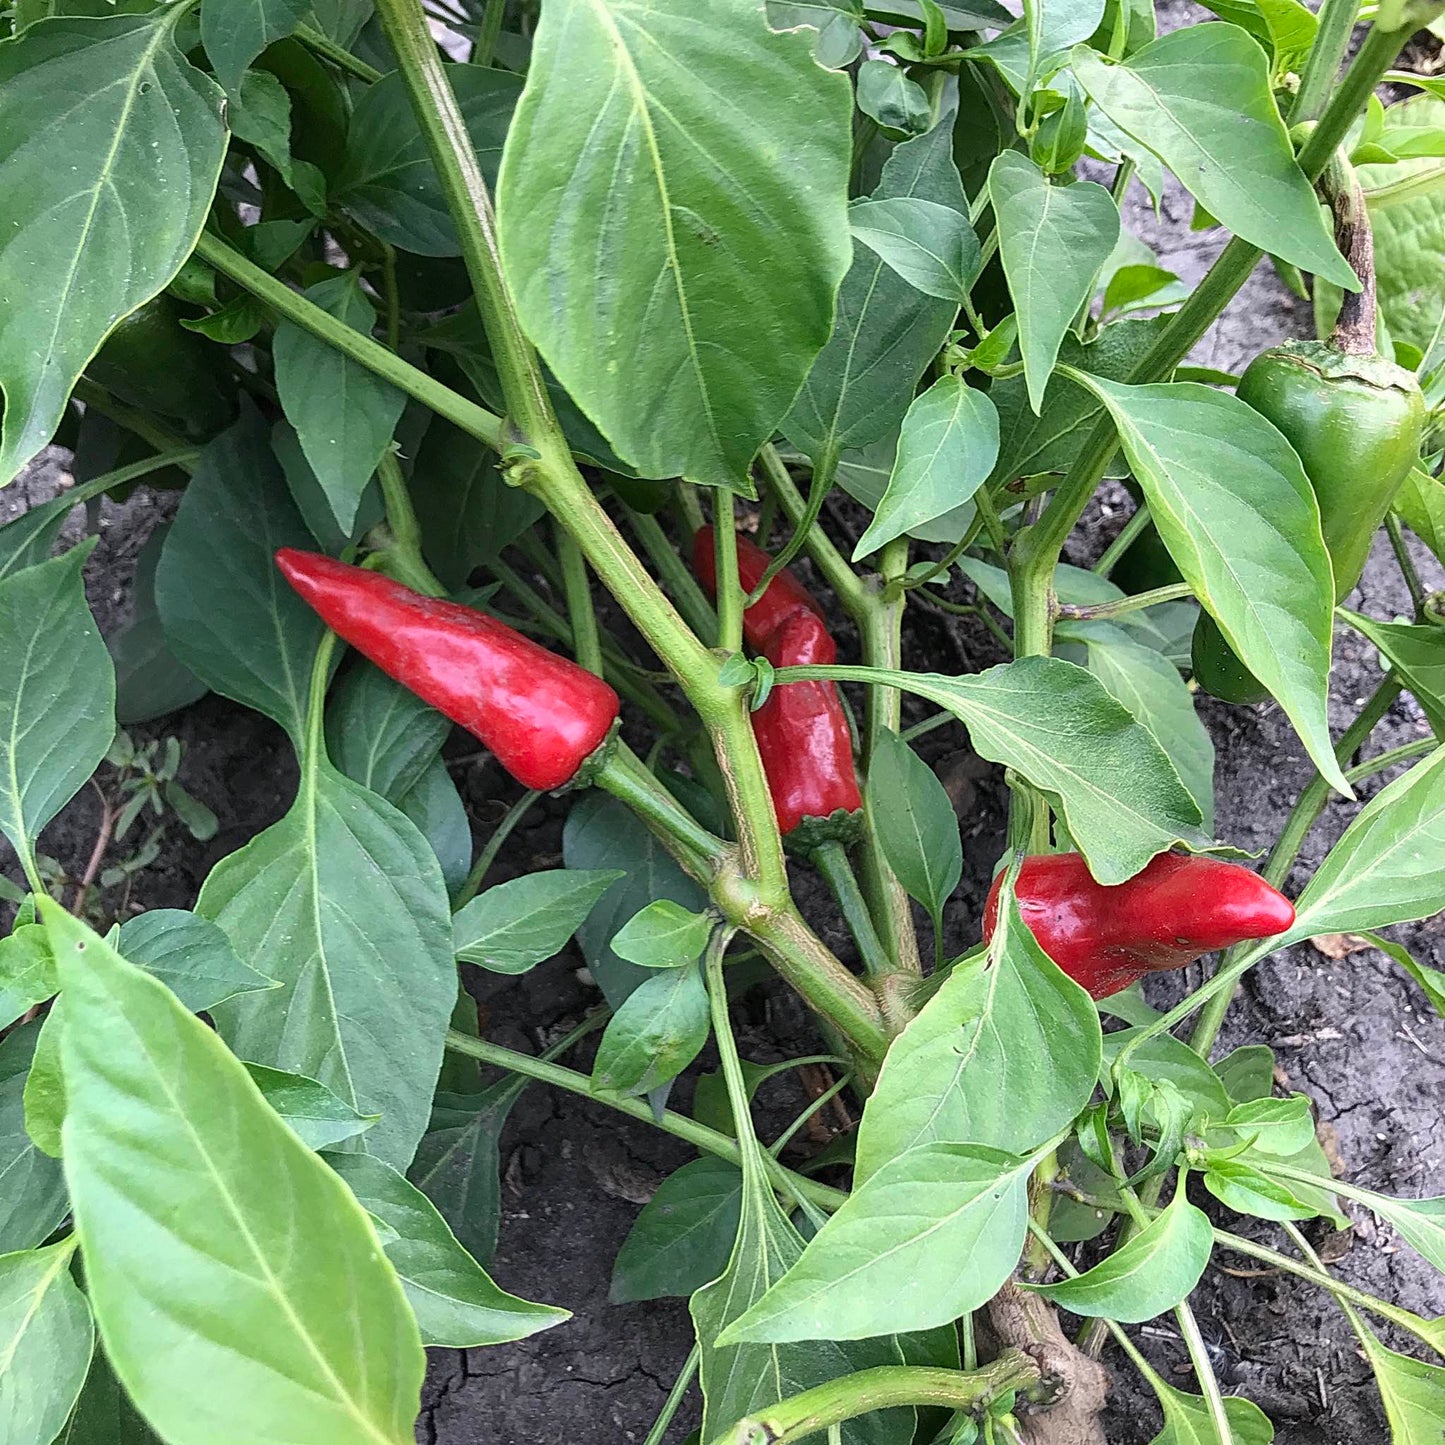 Ripe red hot peppers on a leafy plant.